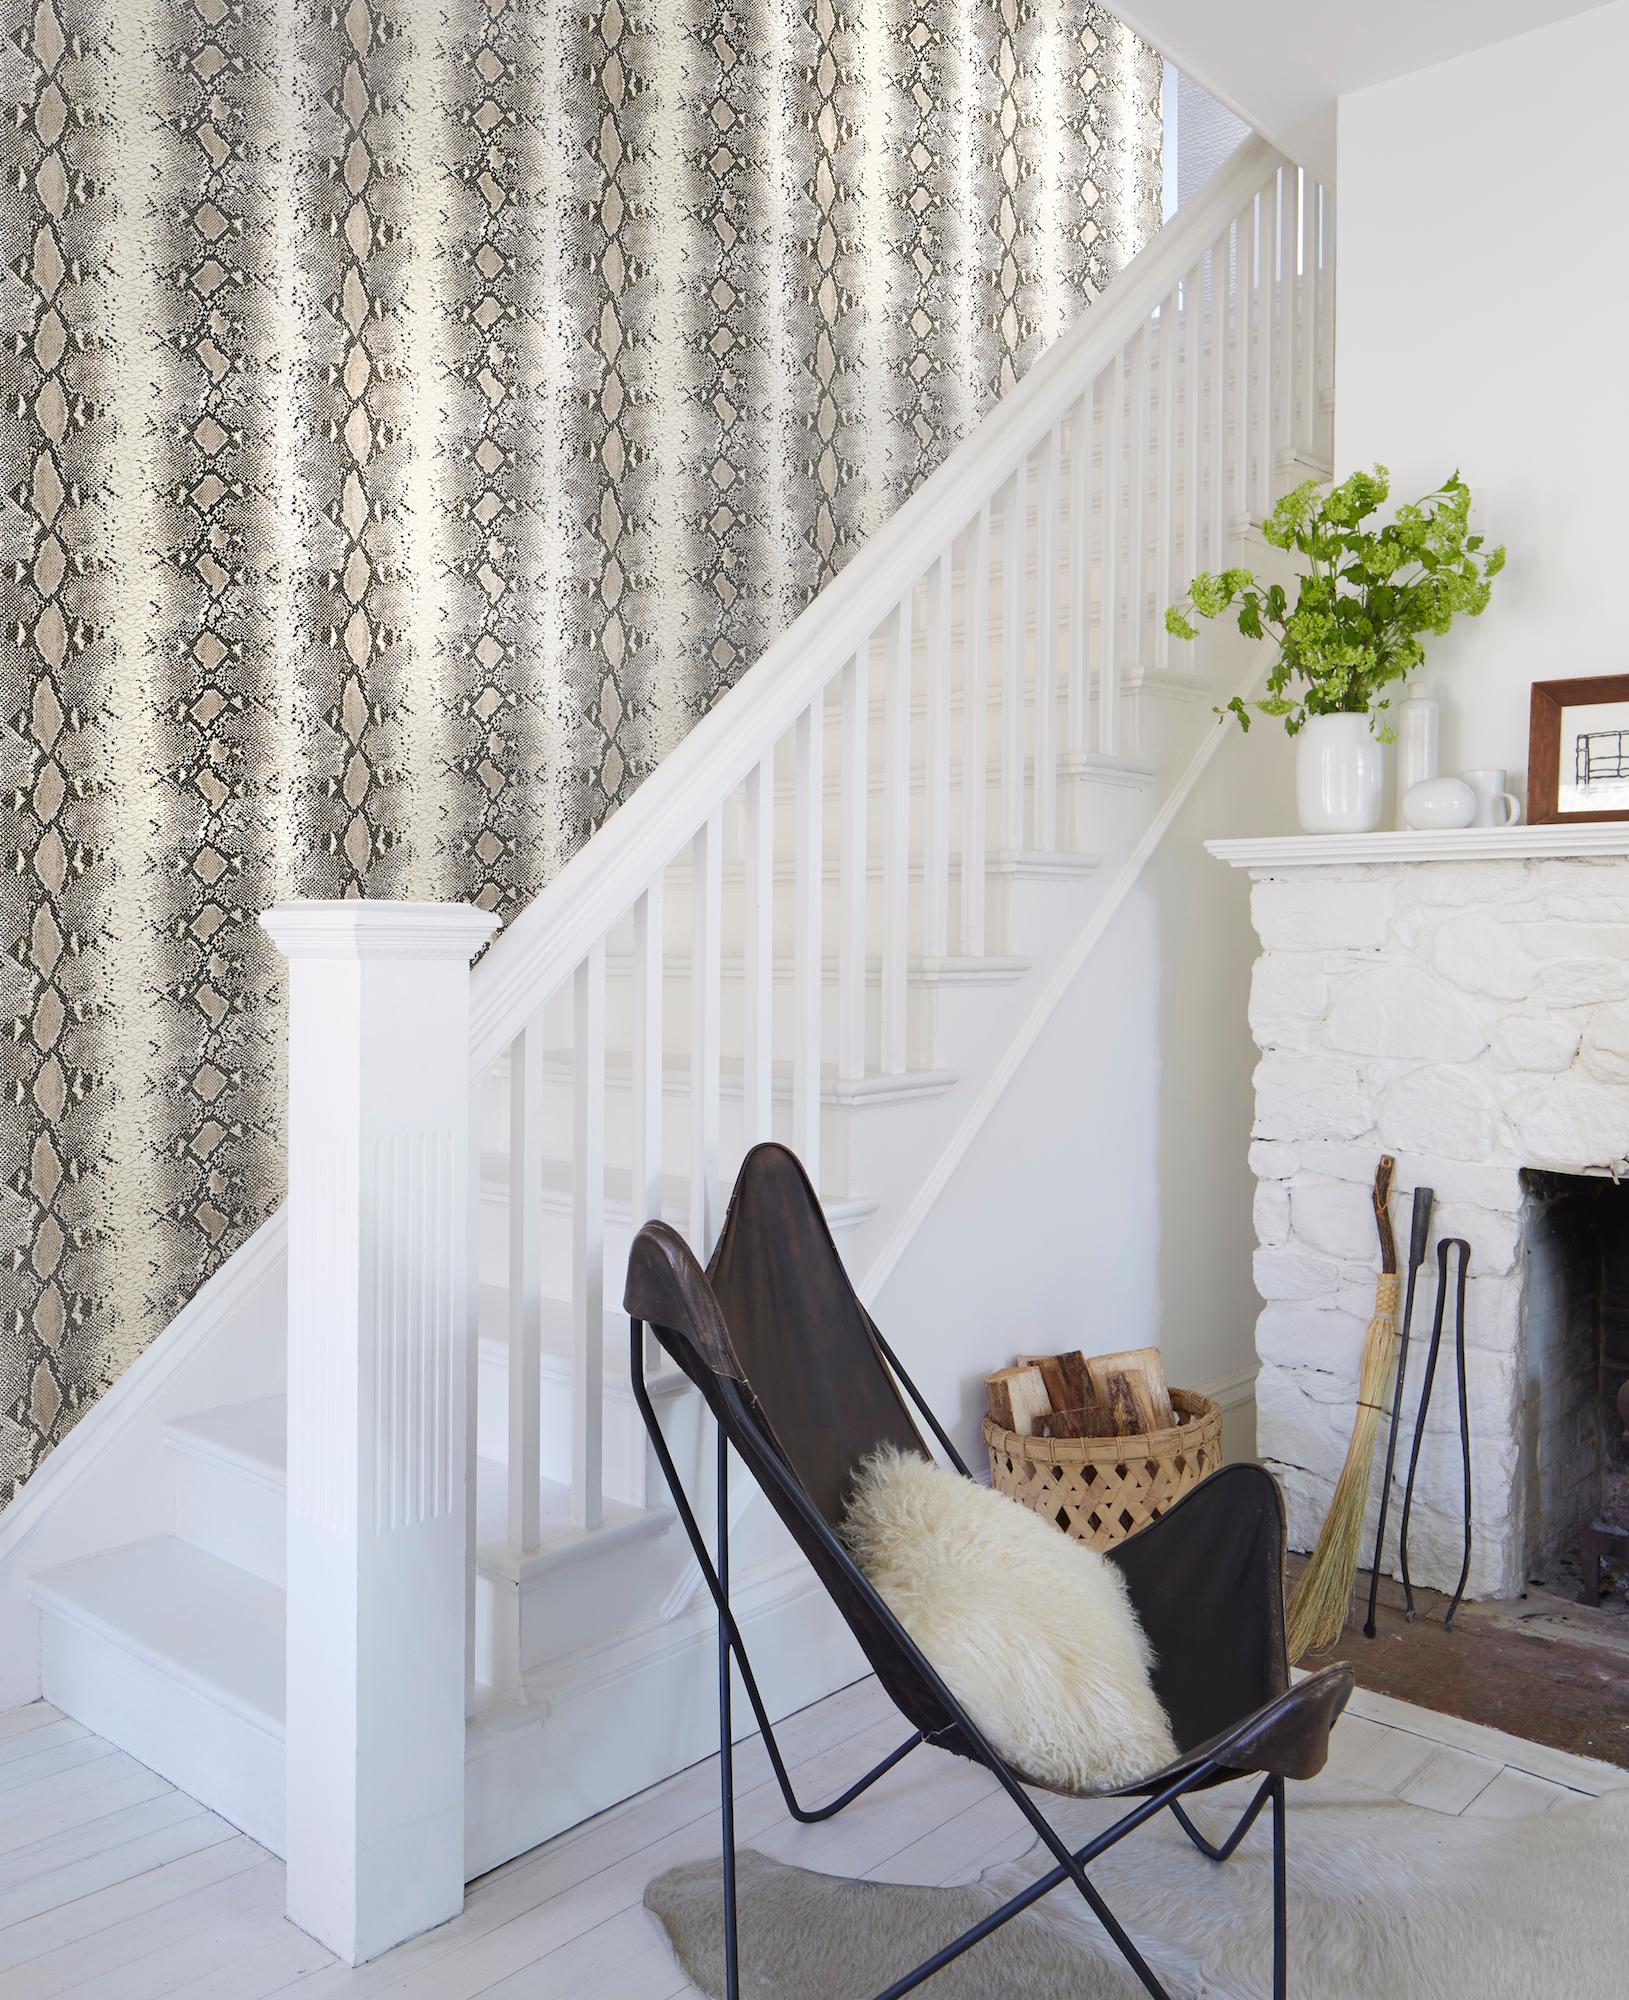 An unabashedly glamorous and sexy wall covering, finished with a slight gloss that amps up the pattern’s va-va-voom appeal.

Since Schumacher was founded in 1889, our family-owned company has been synonymous with style, taste, and innovation. A